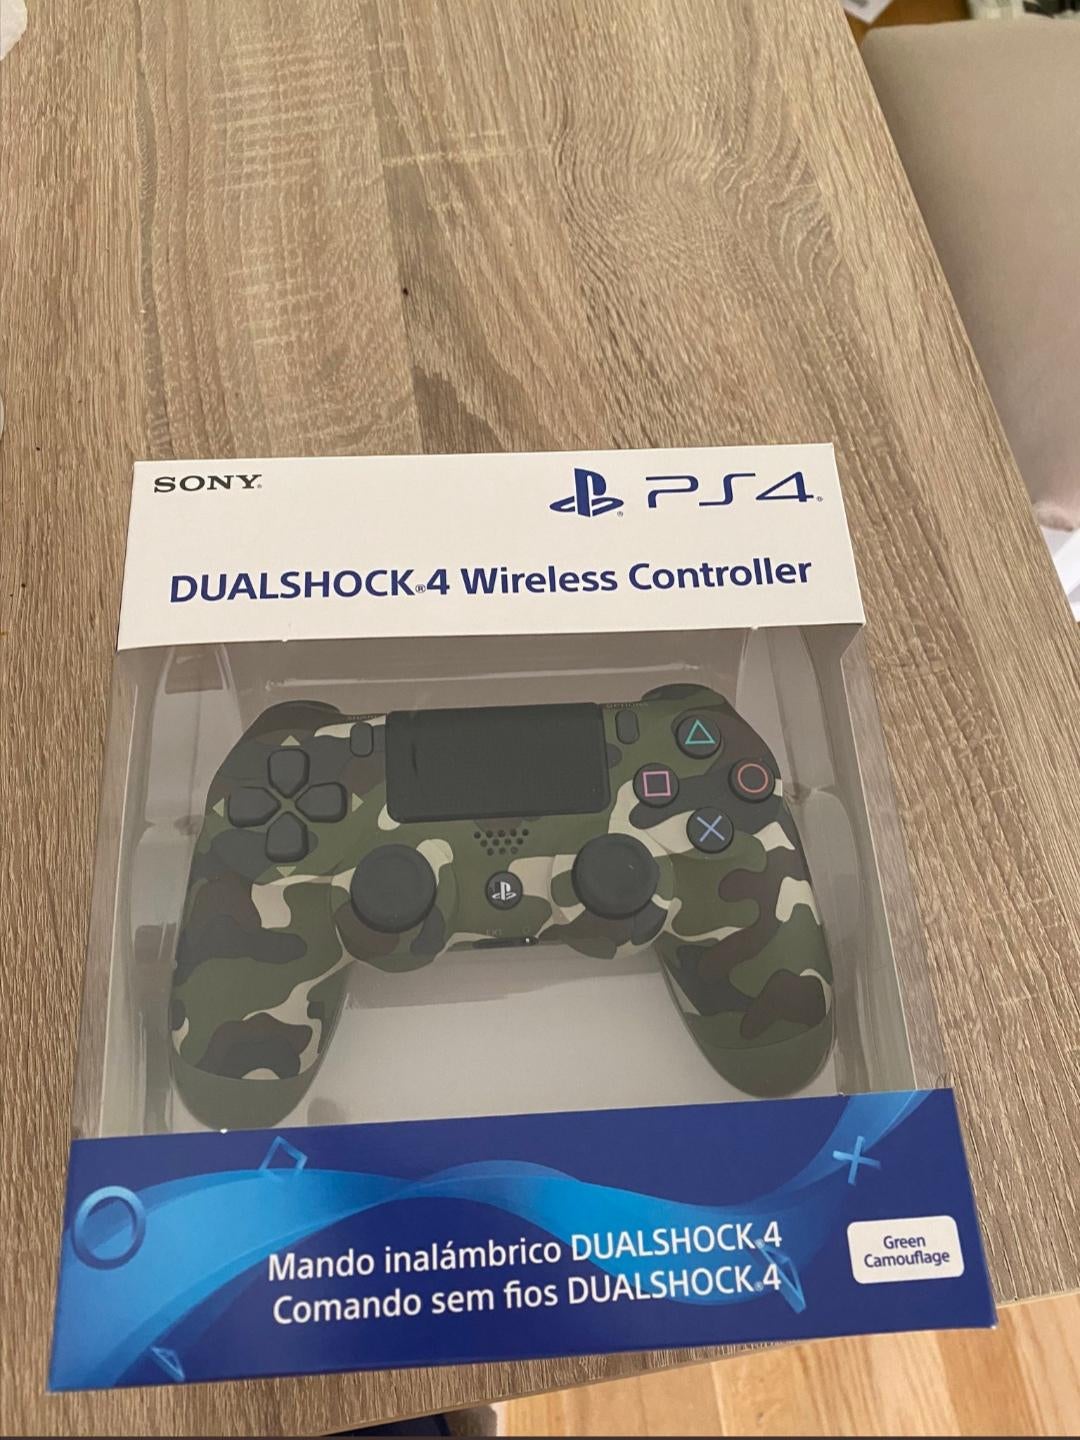 Where do I have to call? I just bought a controller for my ps4 and the ...